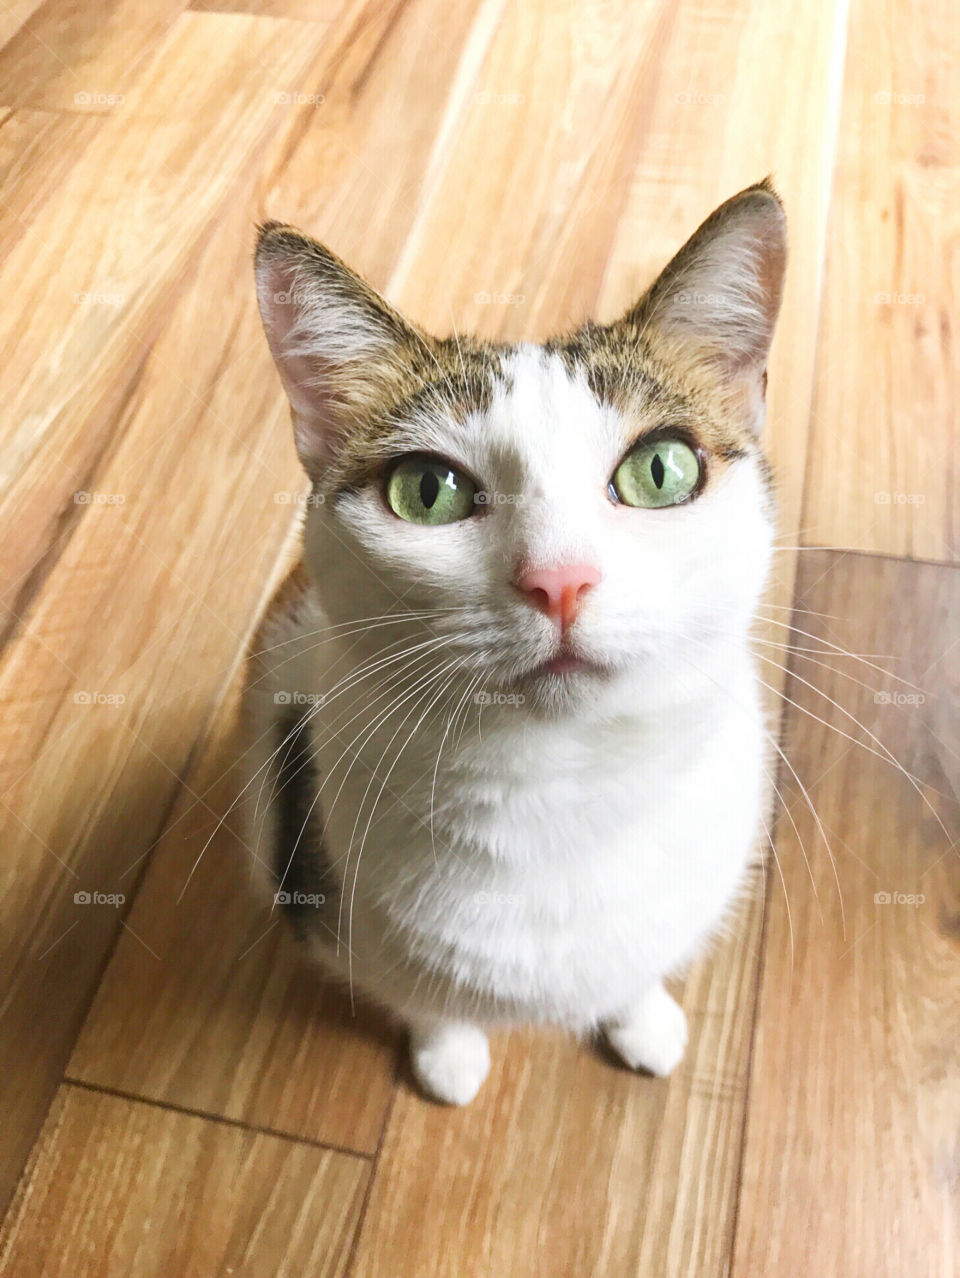 Green eyed cat looks up at you